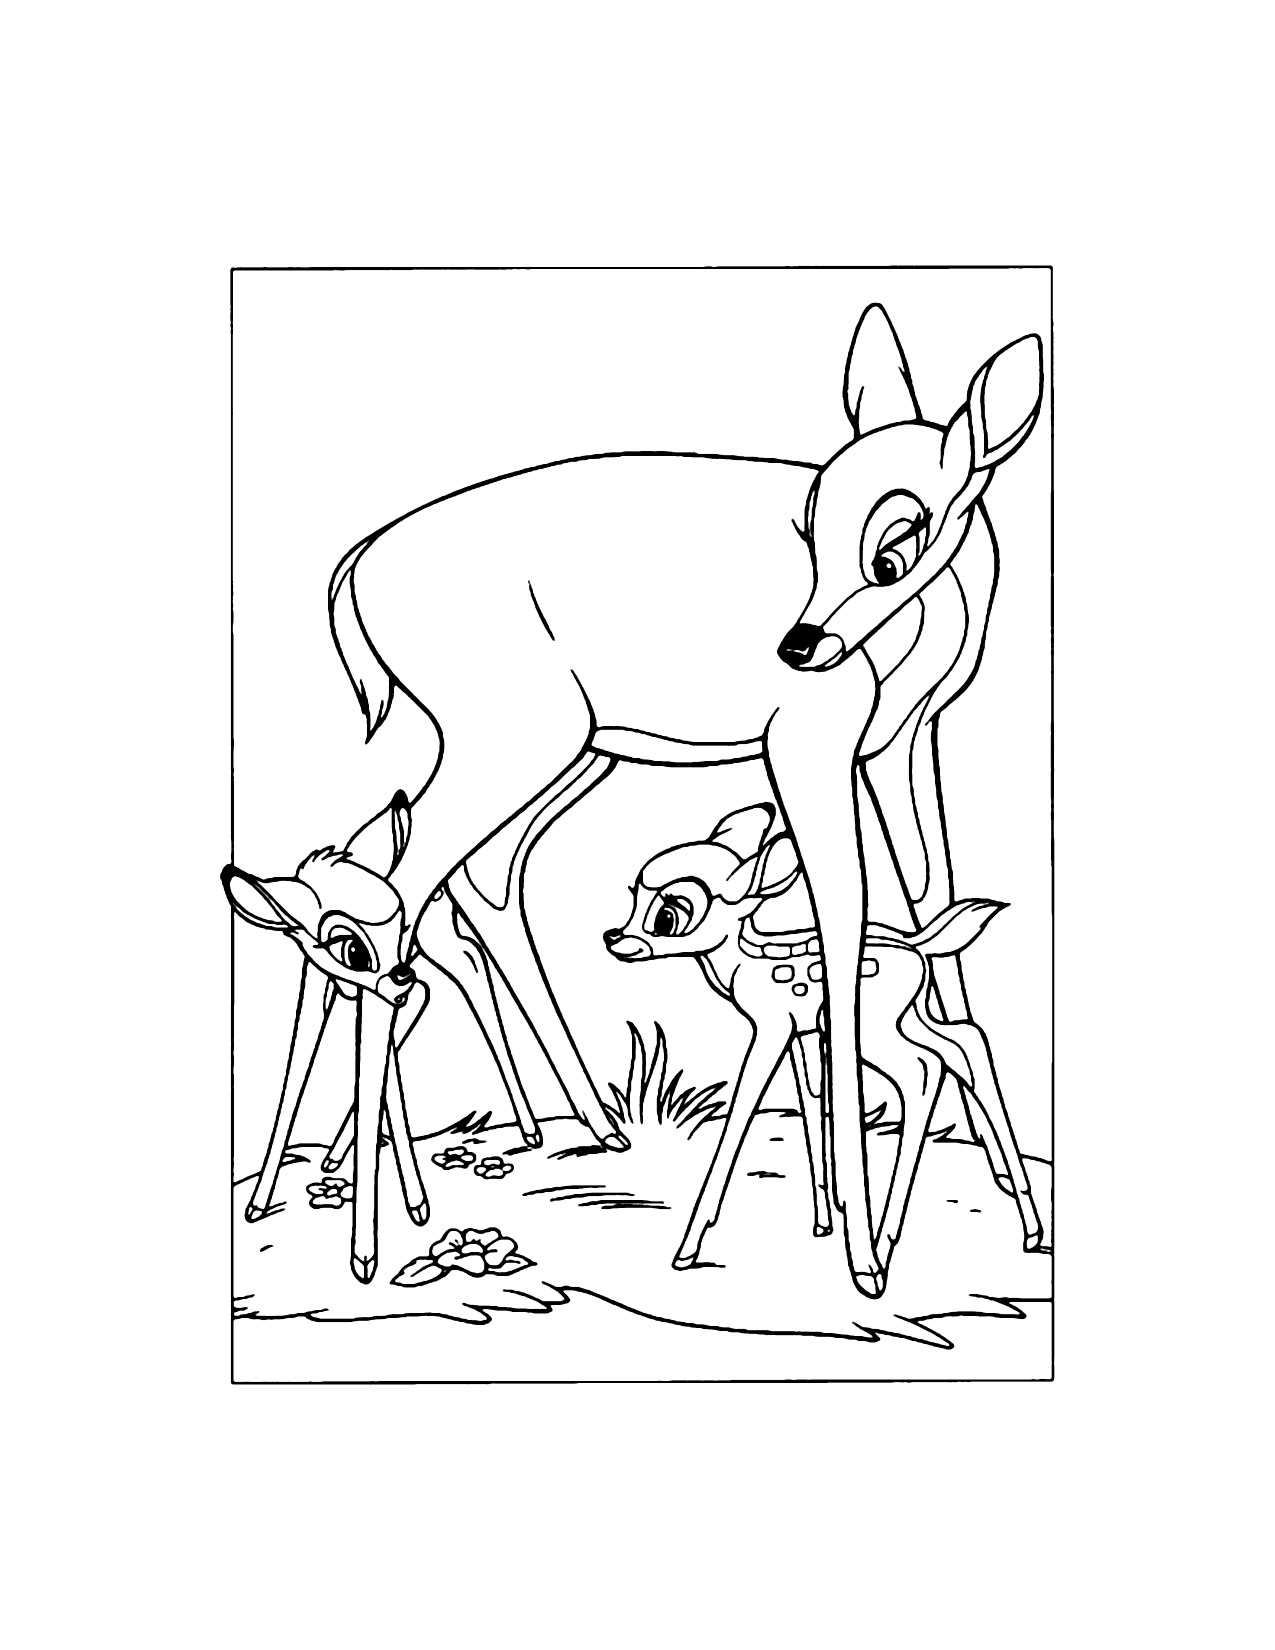 Bambi Meets Faline Coloring Page